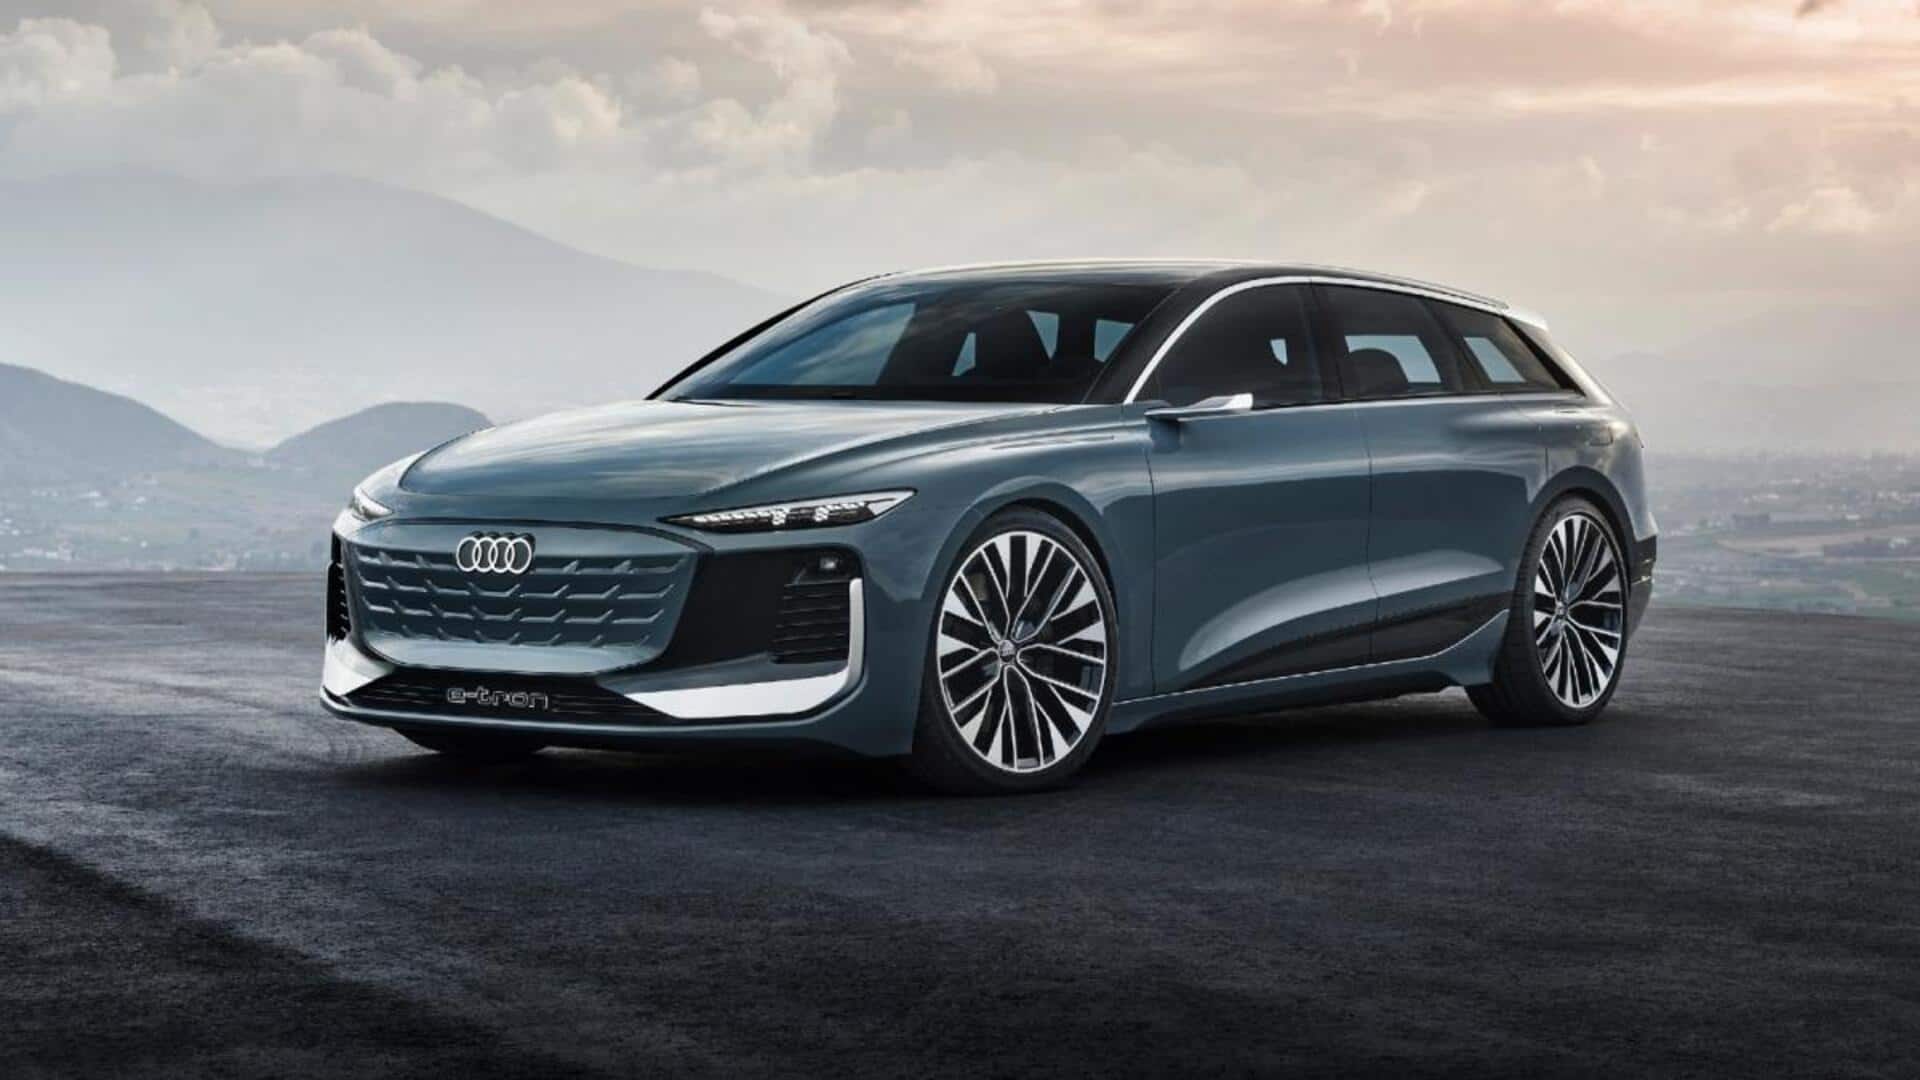 Audi A6 Avant E-Tron will arrive in mid-2024: Expected features